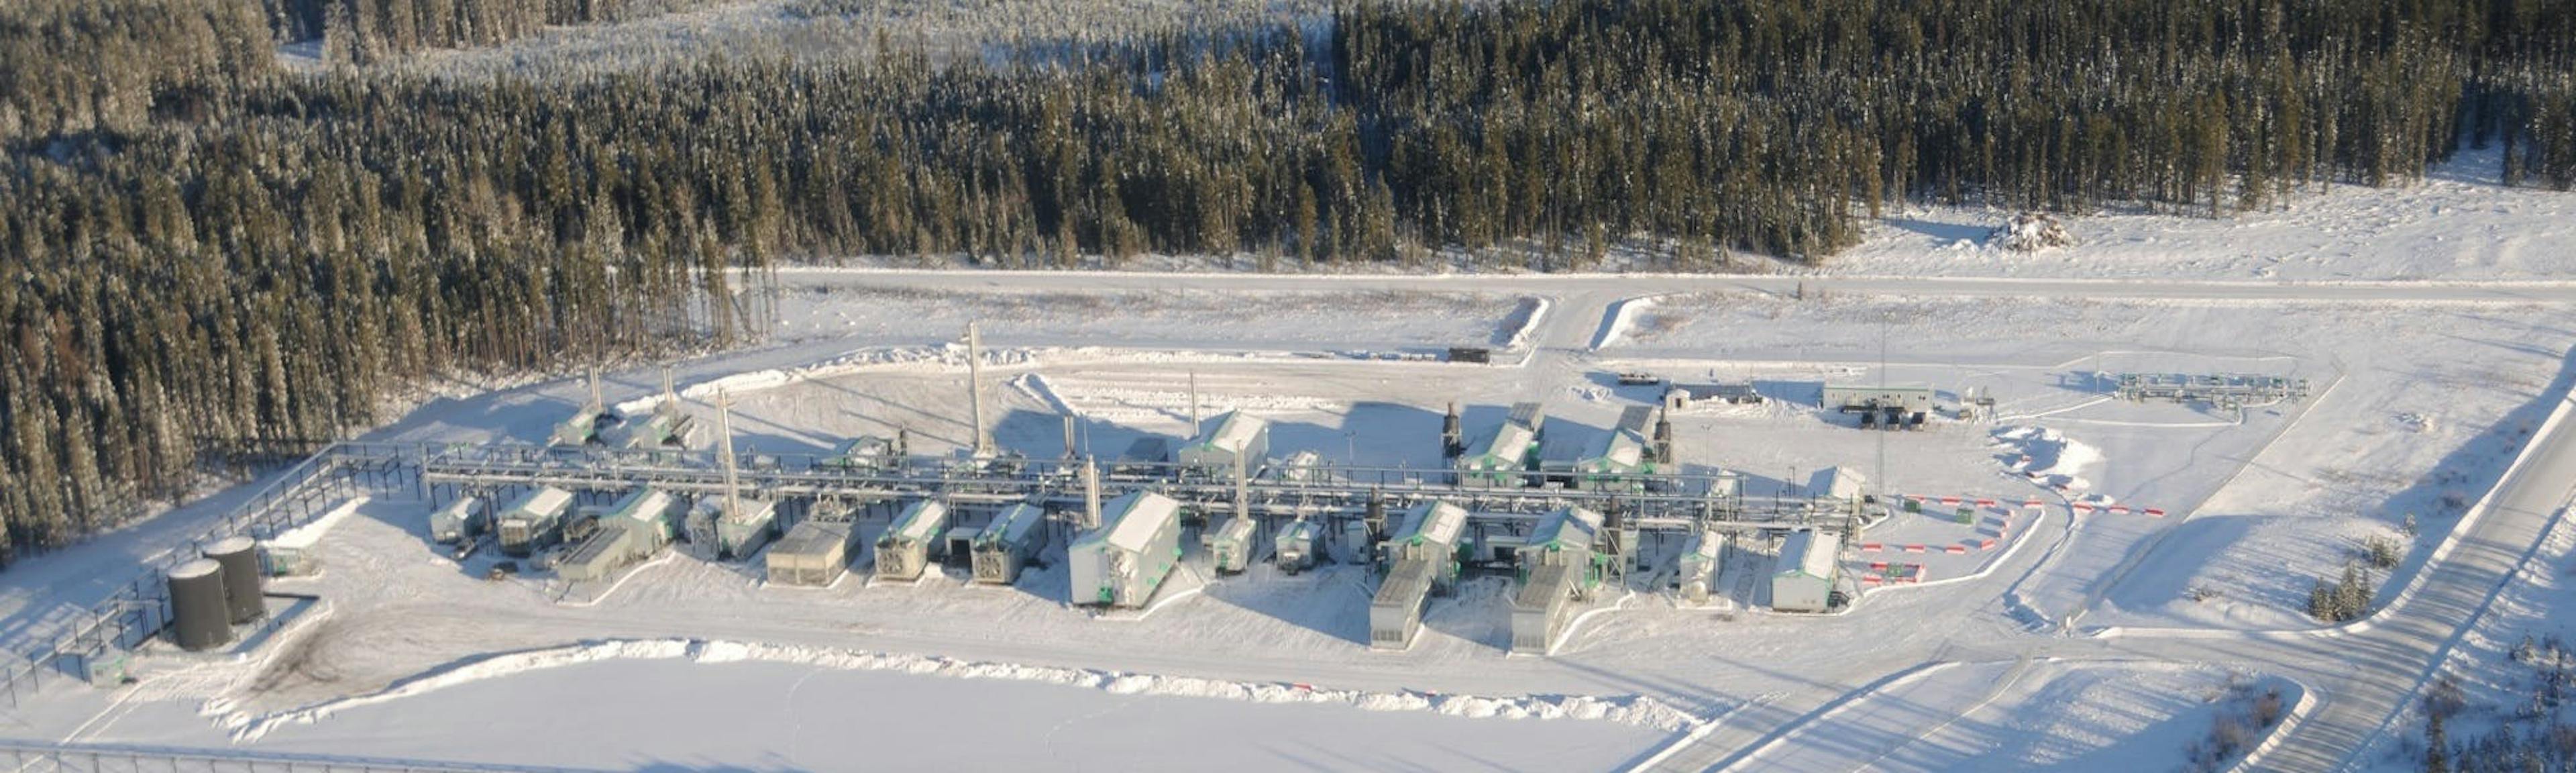 An aerial view of the Banshee Gas Plant during winter.